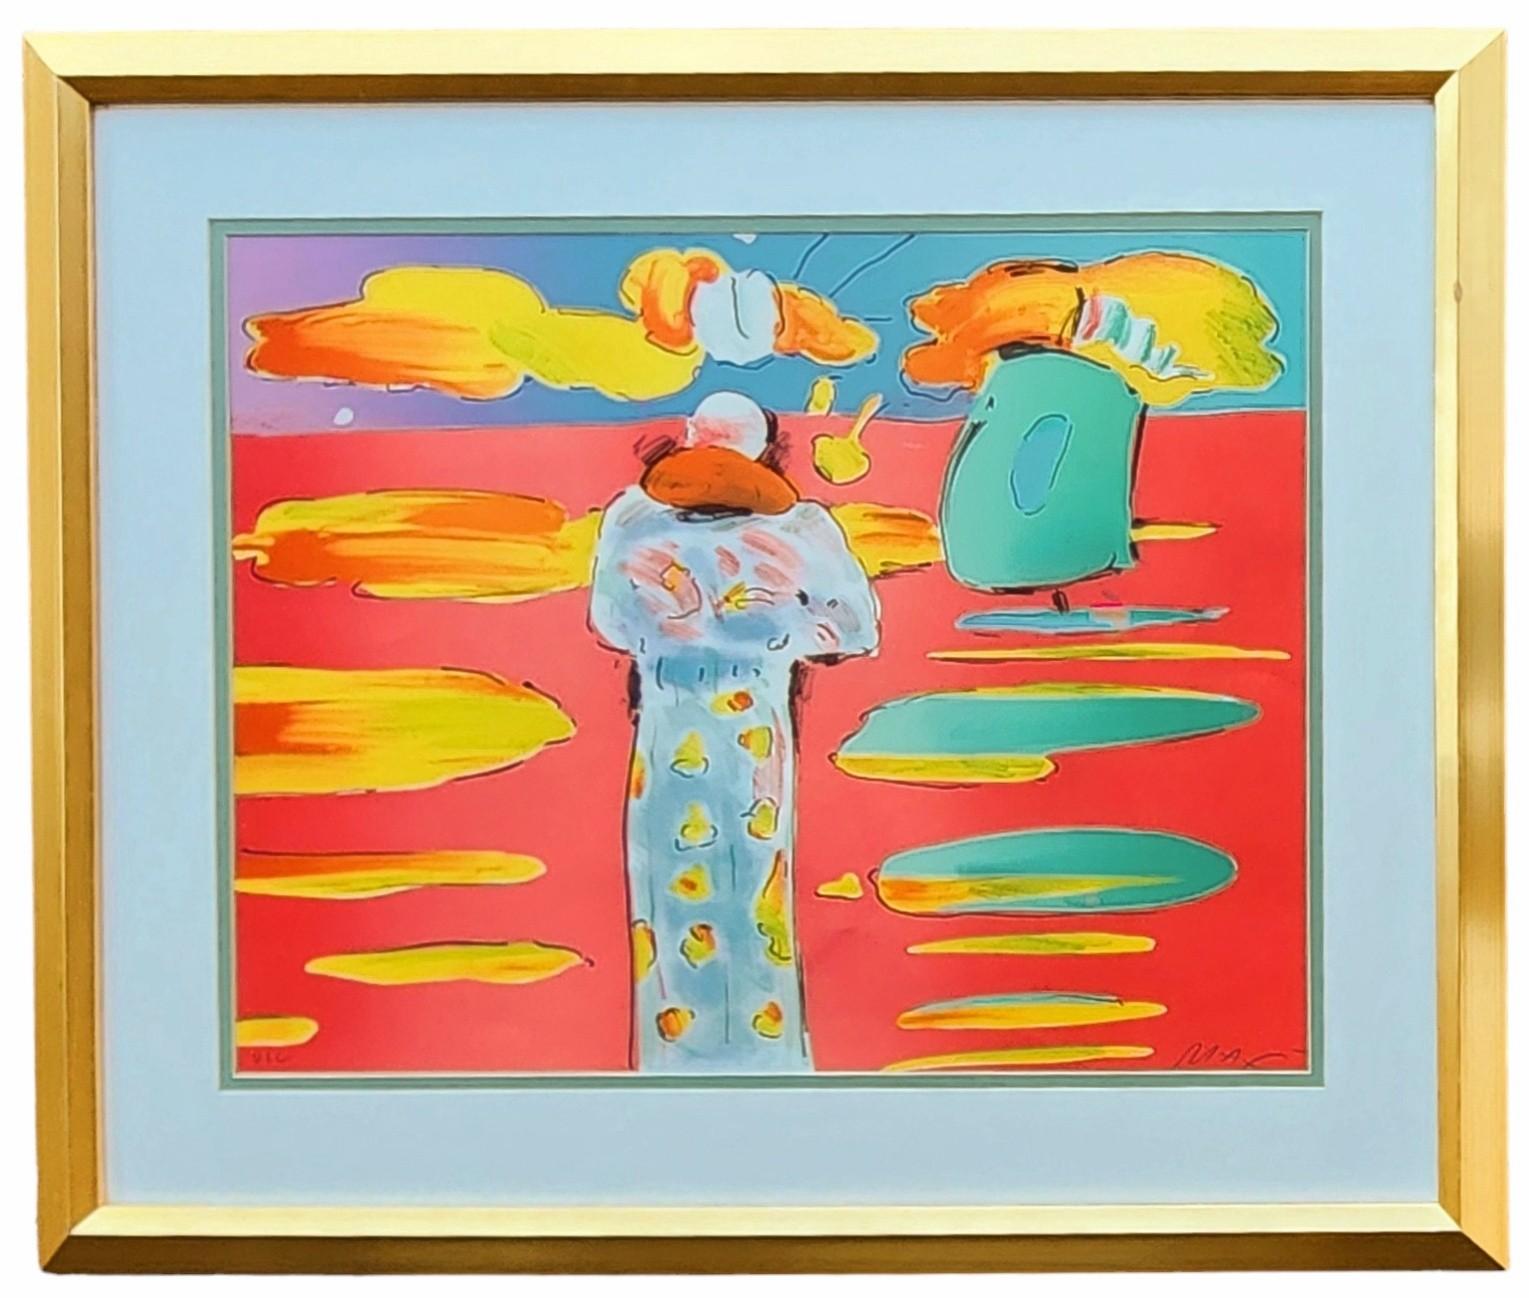 Monk at The Red Sea - Print by Peter Max